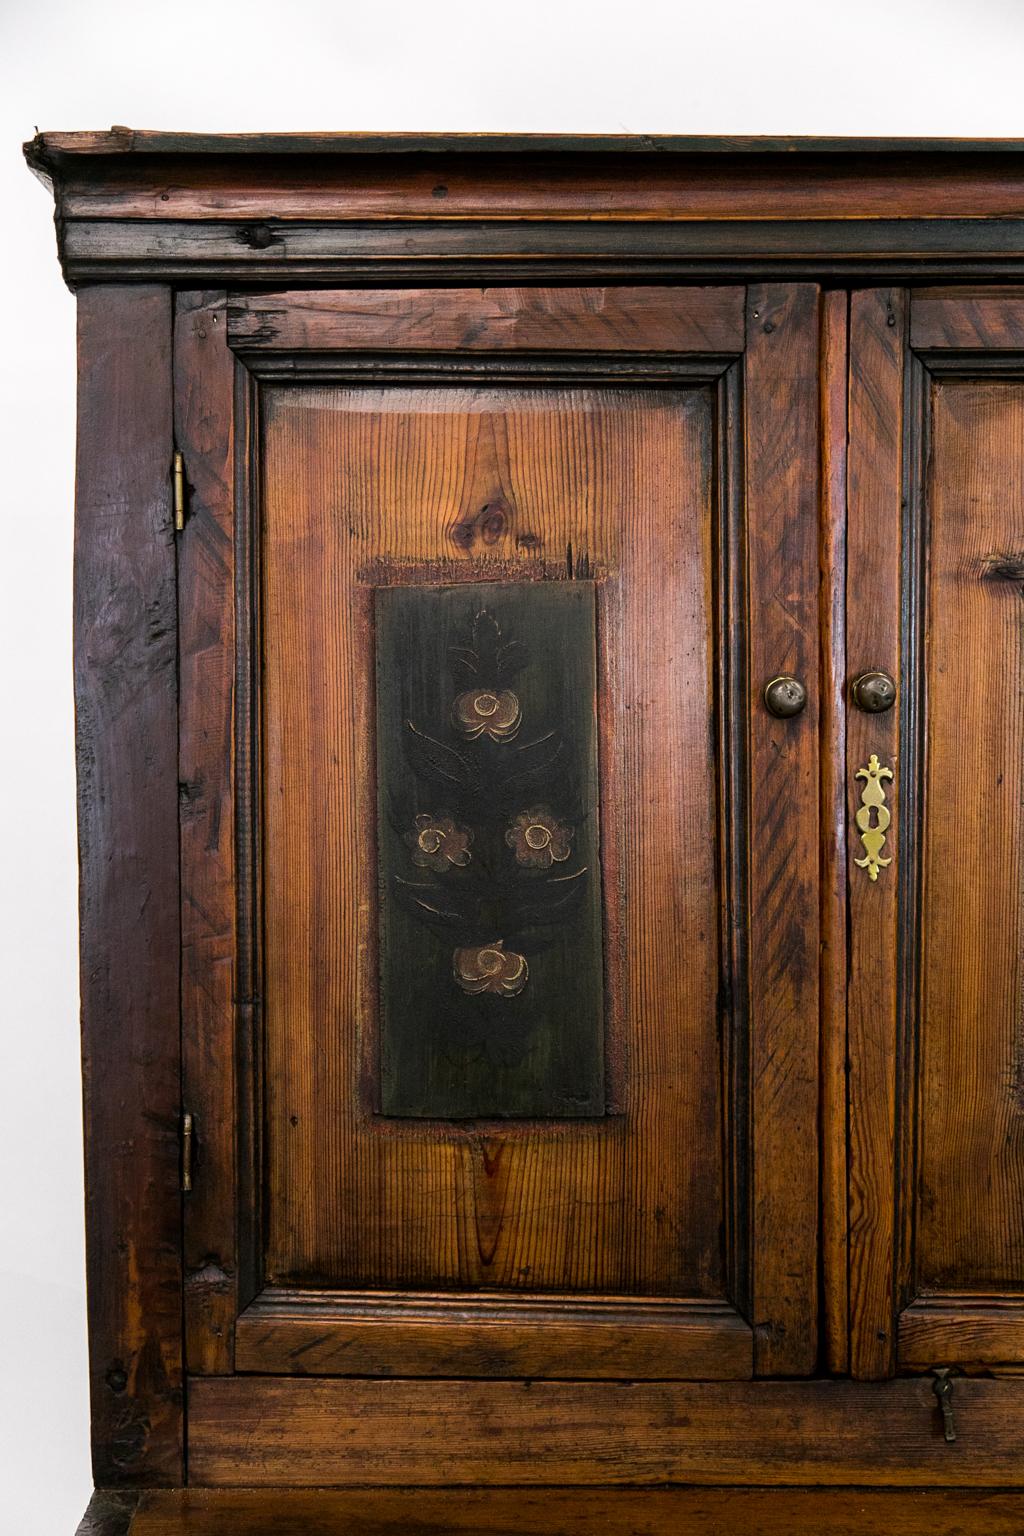 This Central European step back cupboard is made of heart pine. The upper and lower doors have raised panels painted with floral designs and framed with shaped molding. The construction has large exposed dovetails and exposed mortise and Tenon